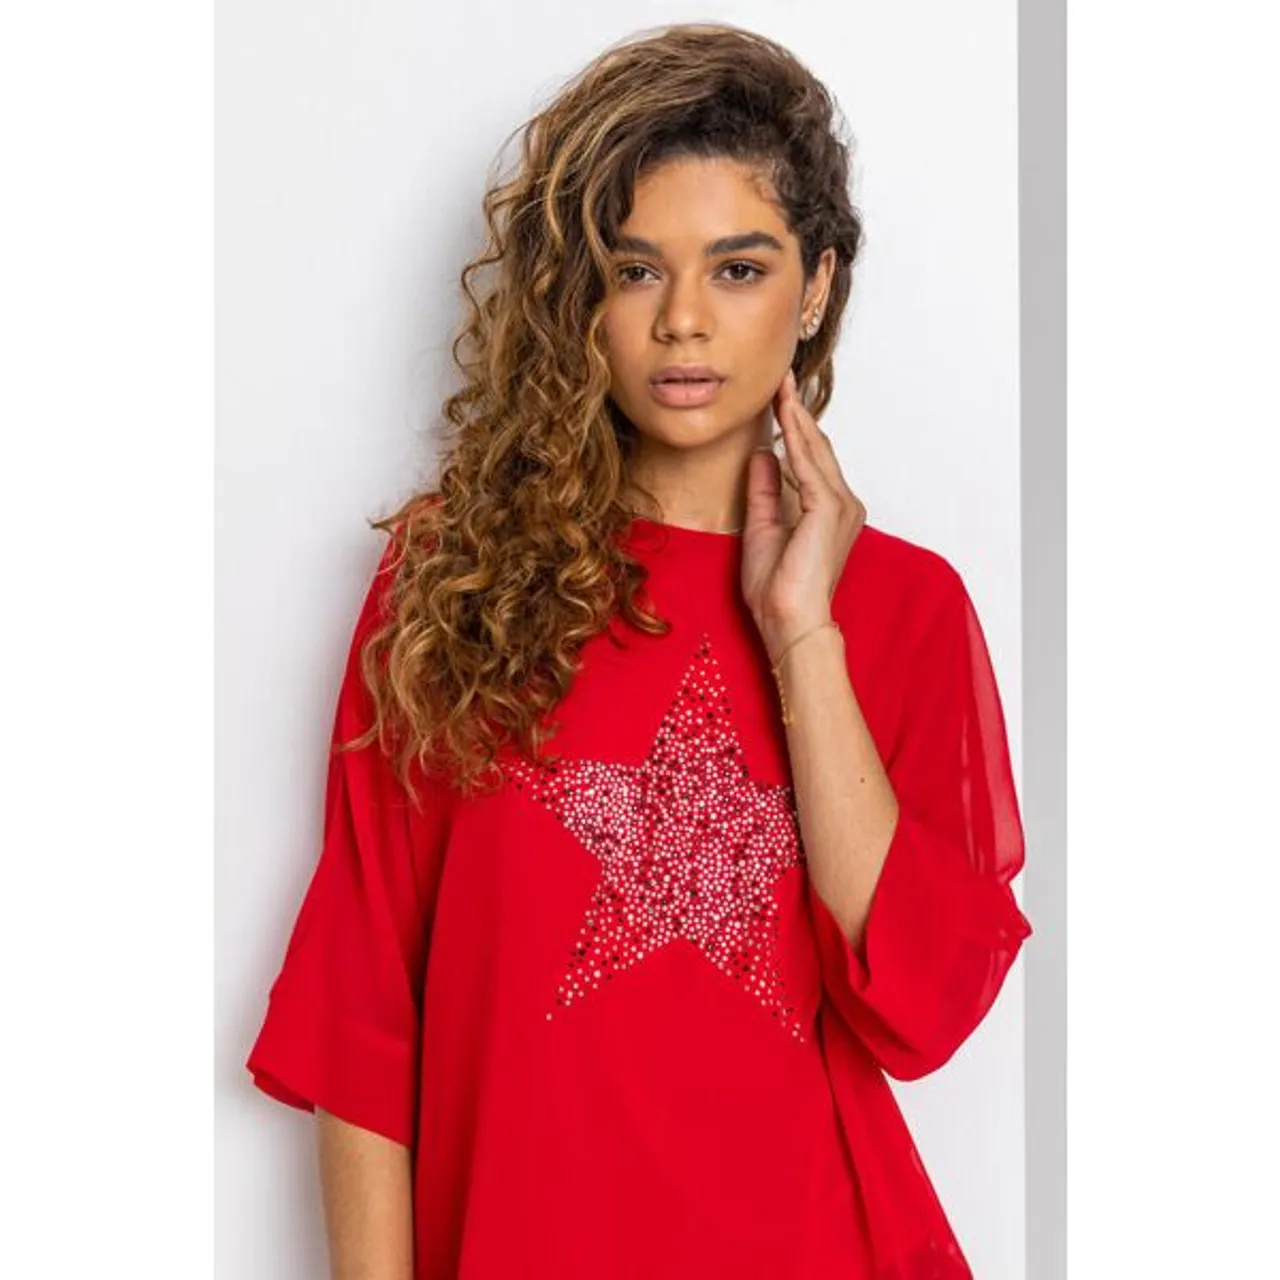 Roman Star Embellished Chiffon Top in Red 10 female